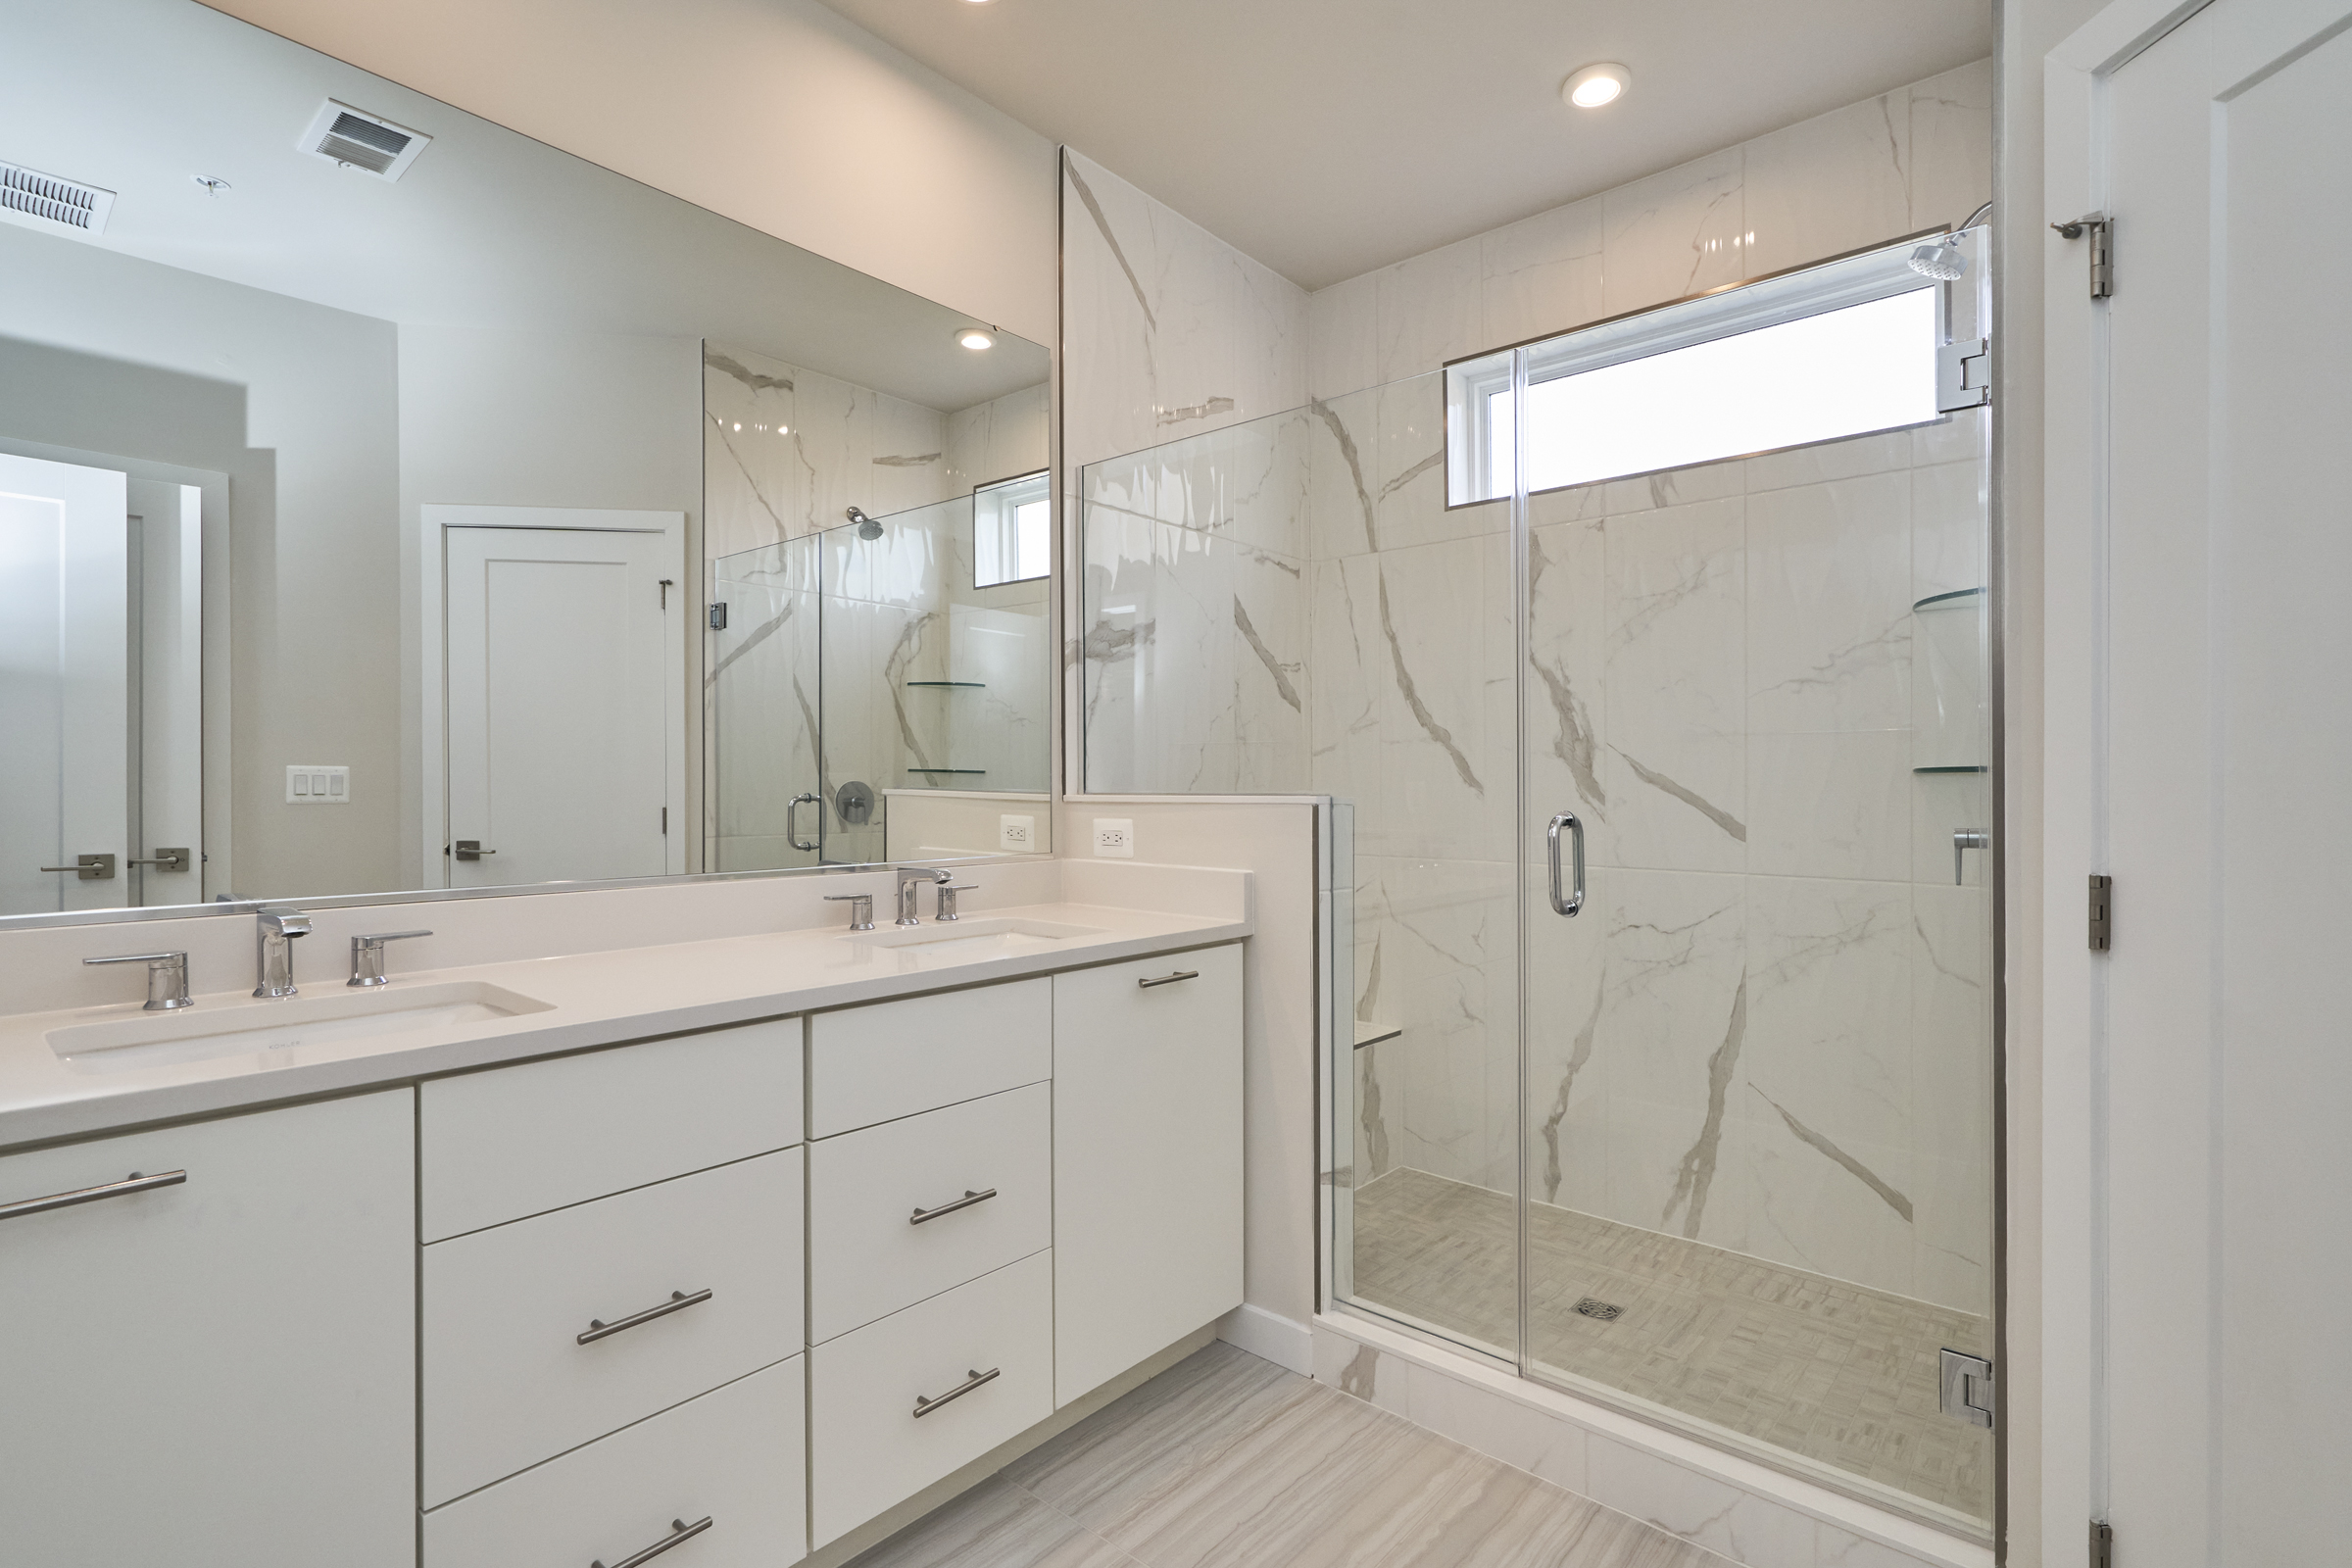 Interior professional photo of 43522 Centergate Drive - showing the primary bathroom with quartz countertops and zero entry shower